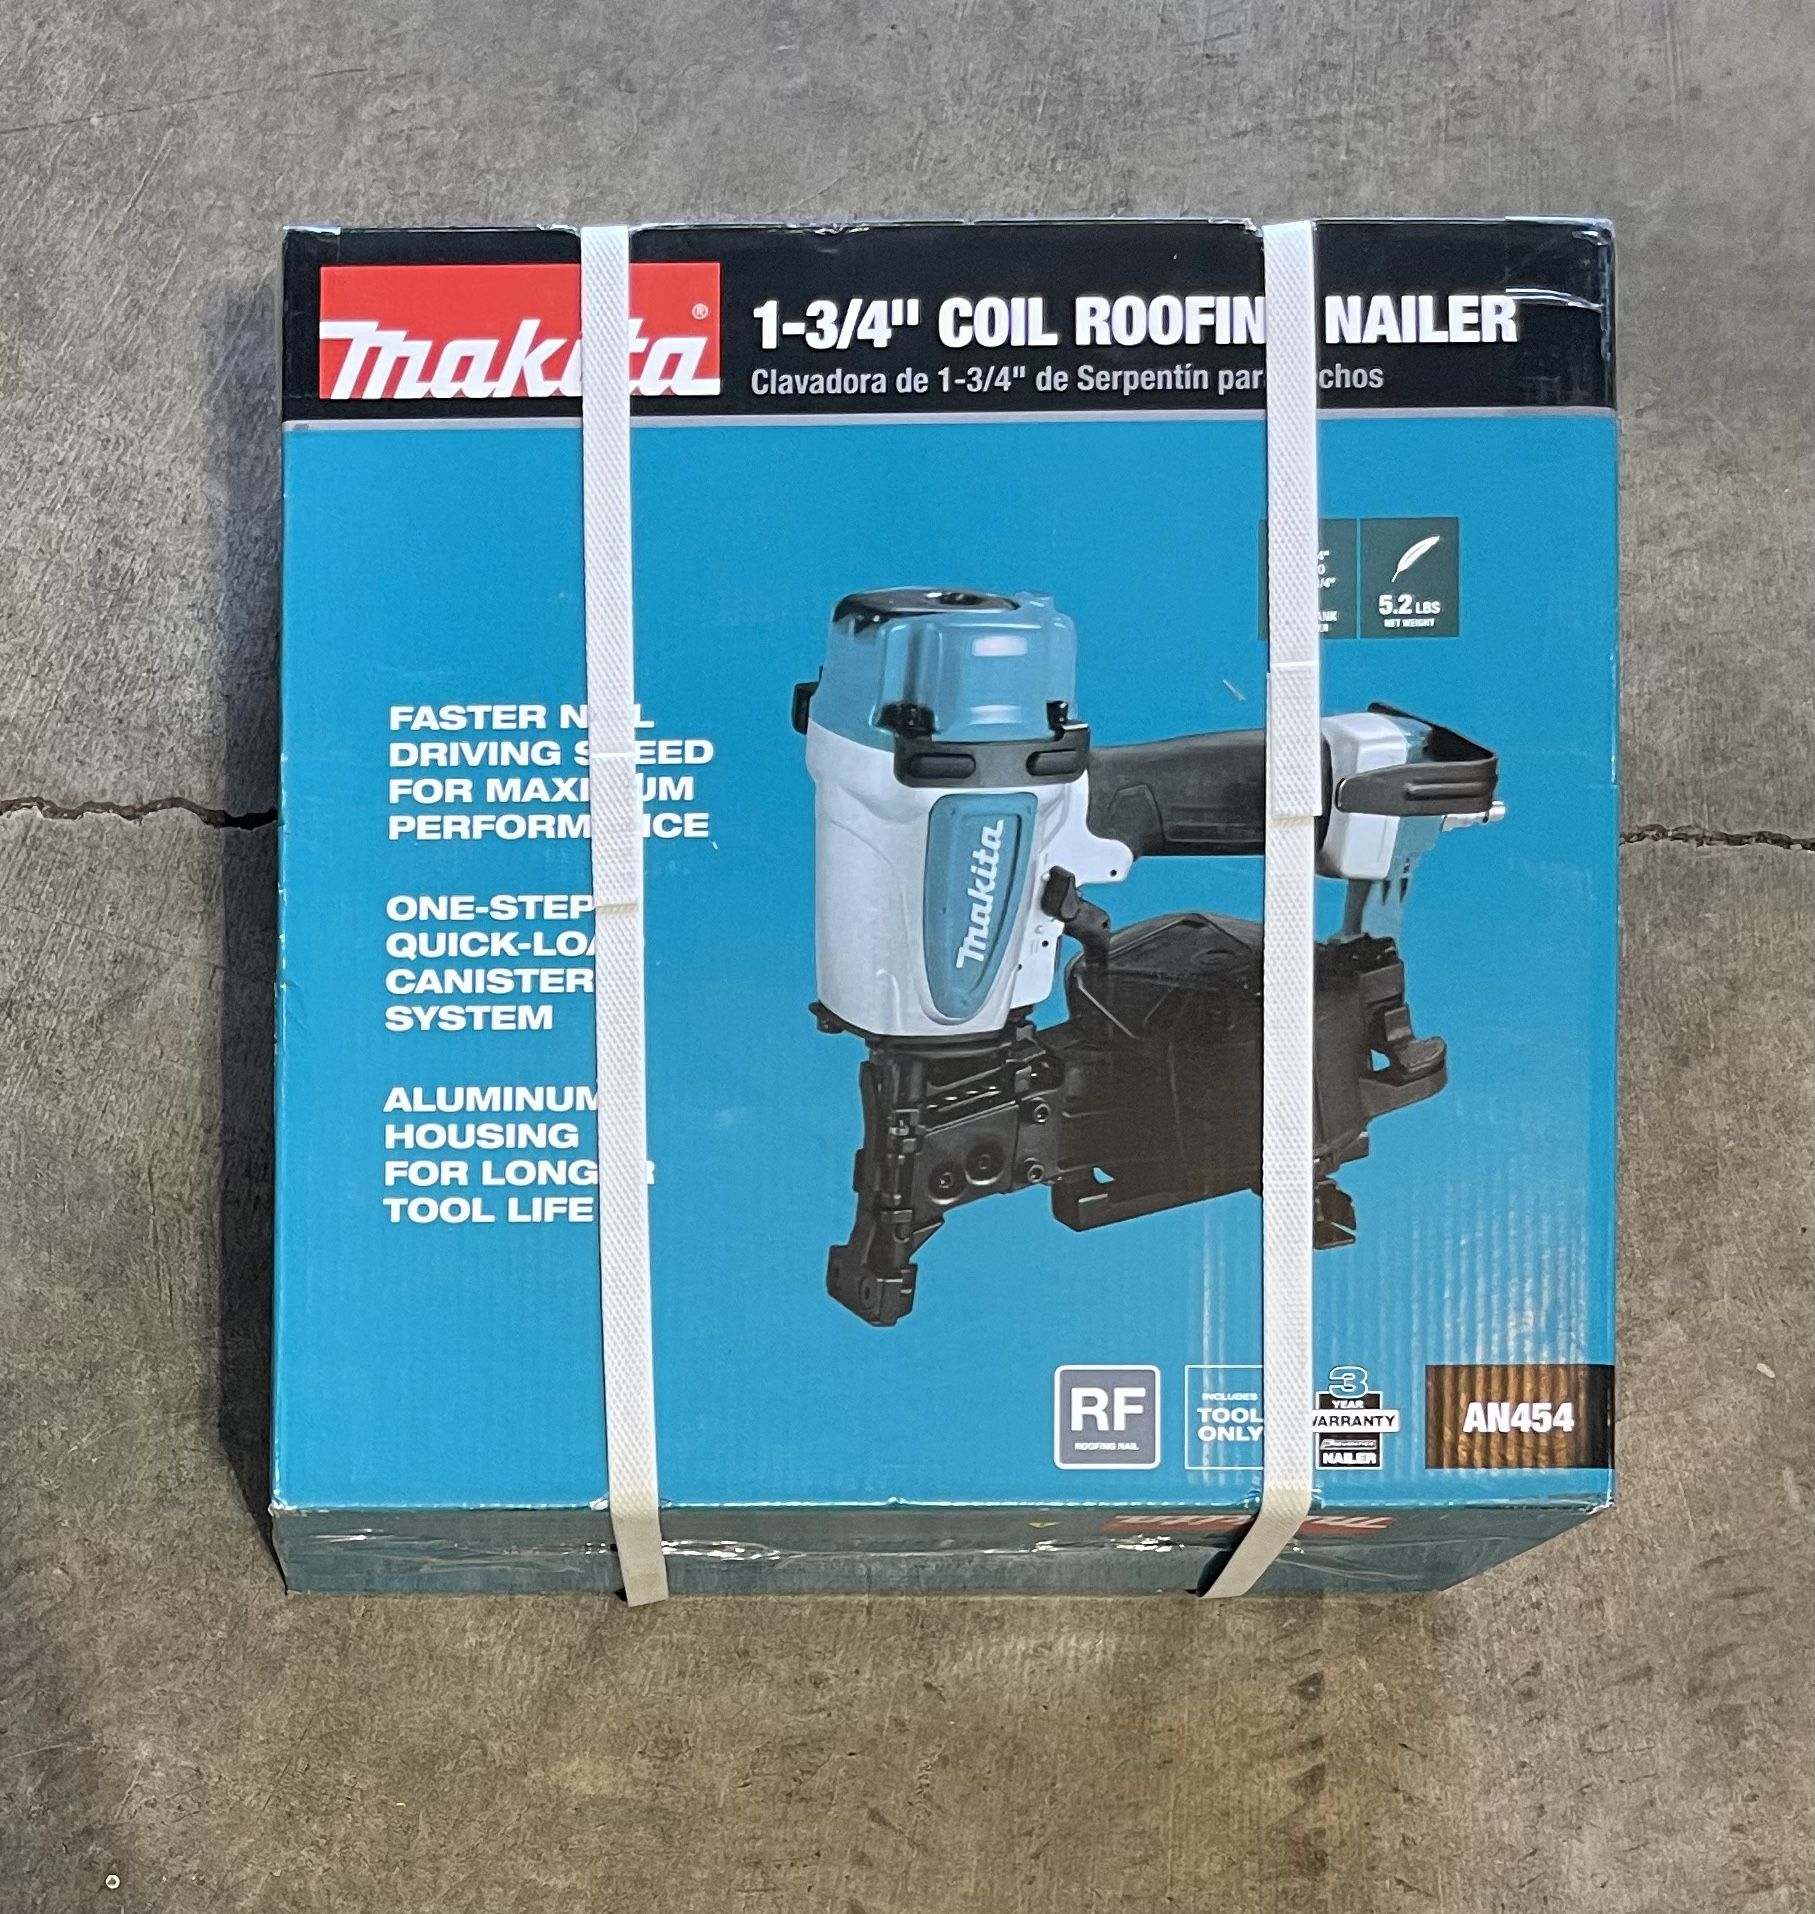 Makita 1-3/4 in. 15° Roofing Coil Nailer Model #AN454 for Sale in Tualatin,  OR OfferUp